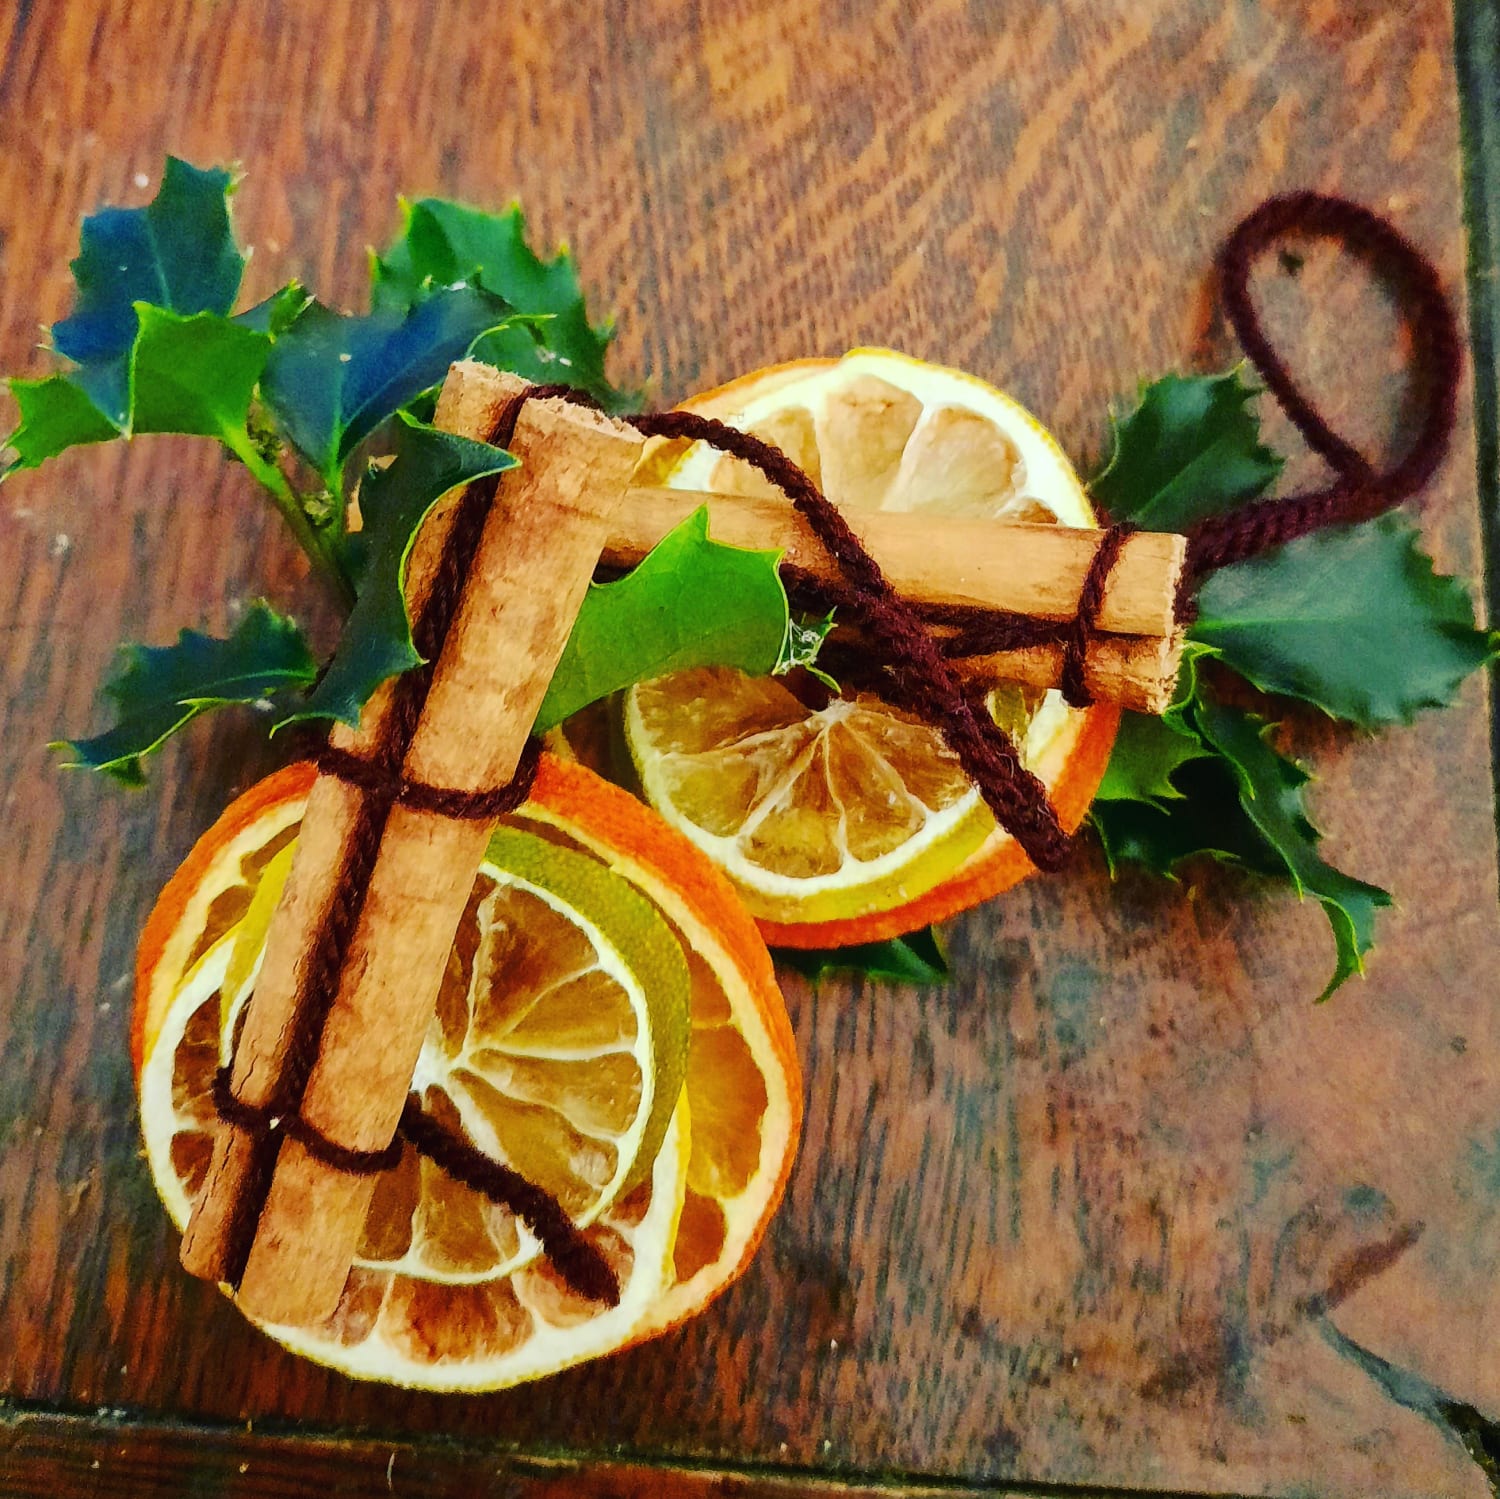 Blessed Yule everyone, have a wonderful winter solstice! Just some homemade yule decorations made with holly from the garden, dehydrated citrus fruits and cinnamon!